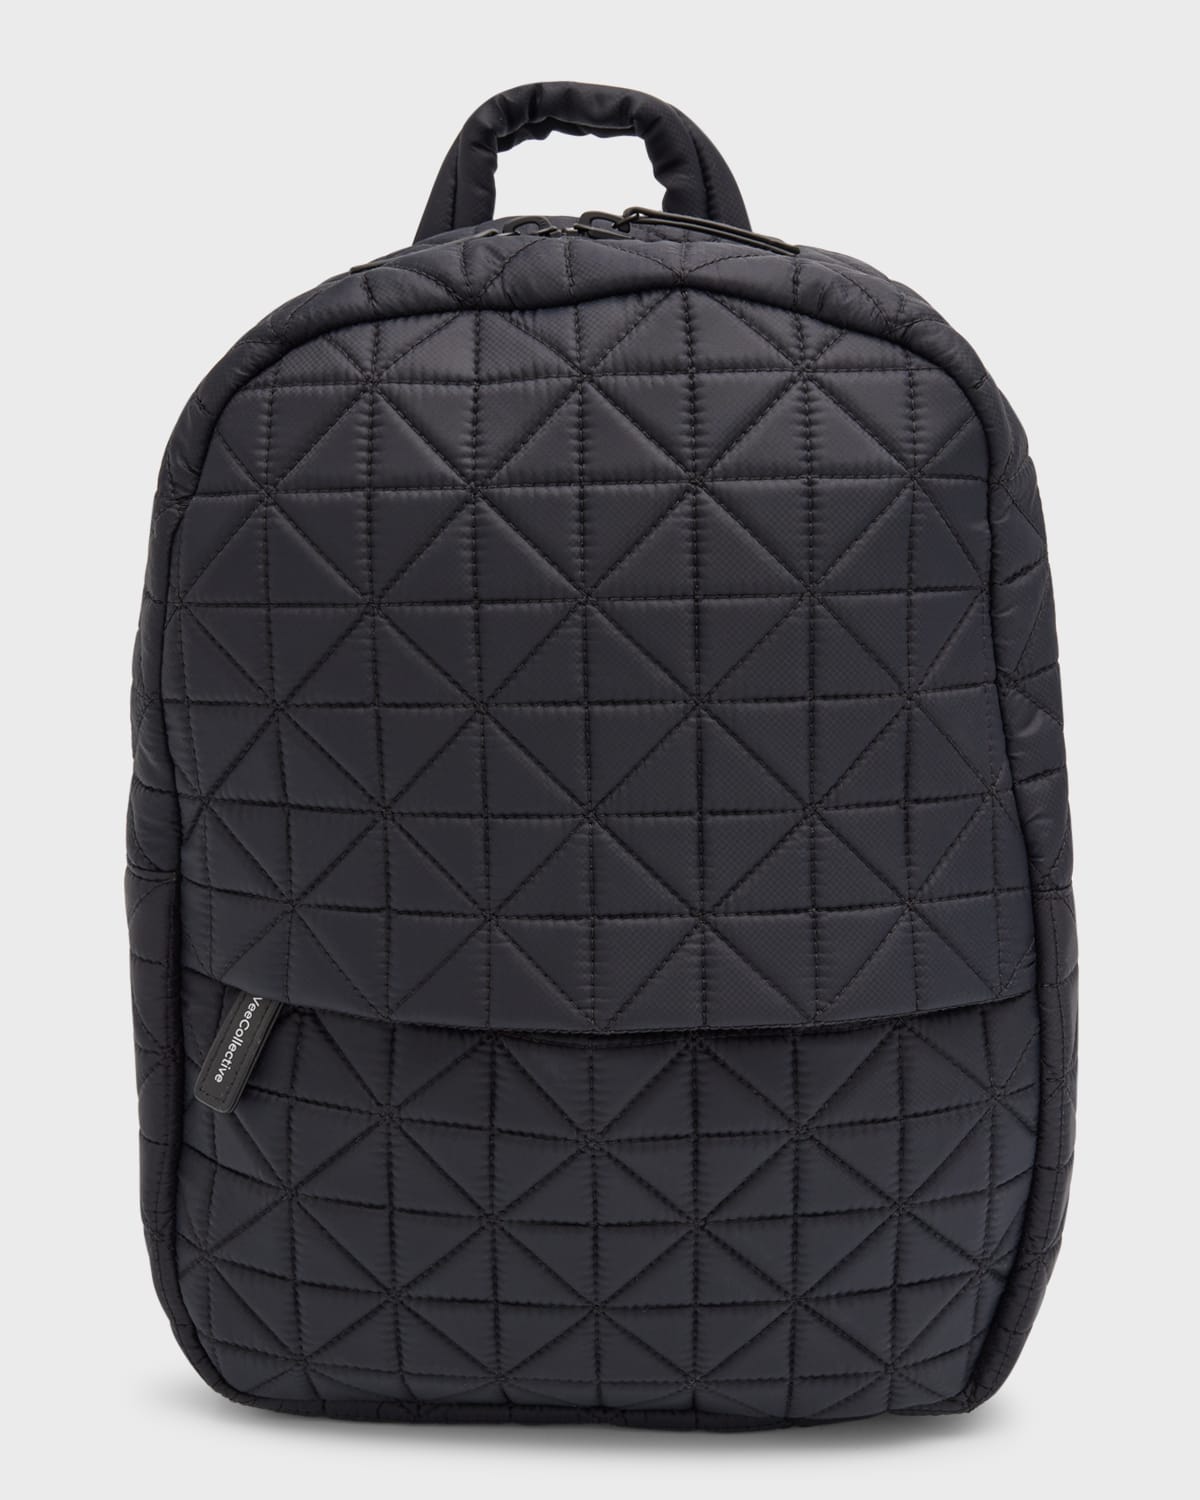 Water-Resistant Quilted Nylon Backpack